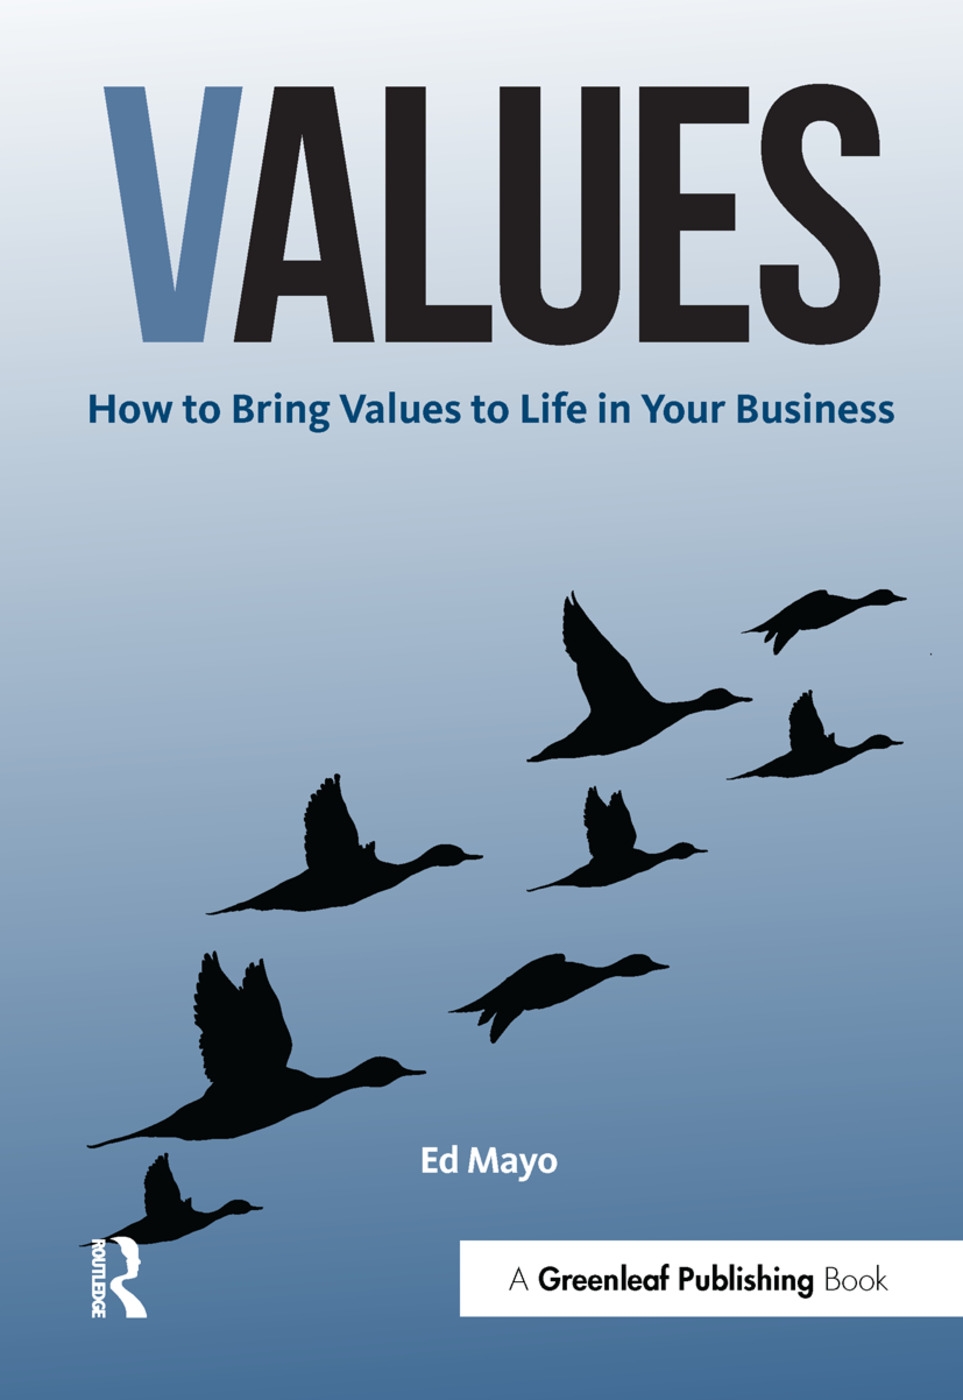 Values: How to Bring Values to Life in your Business